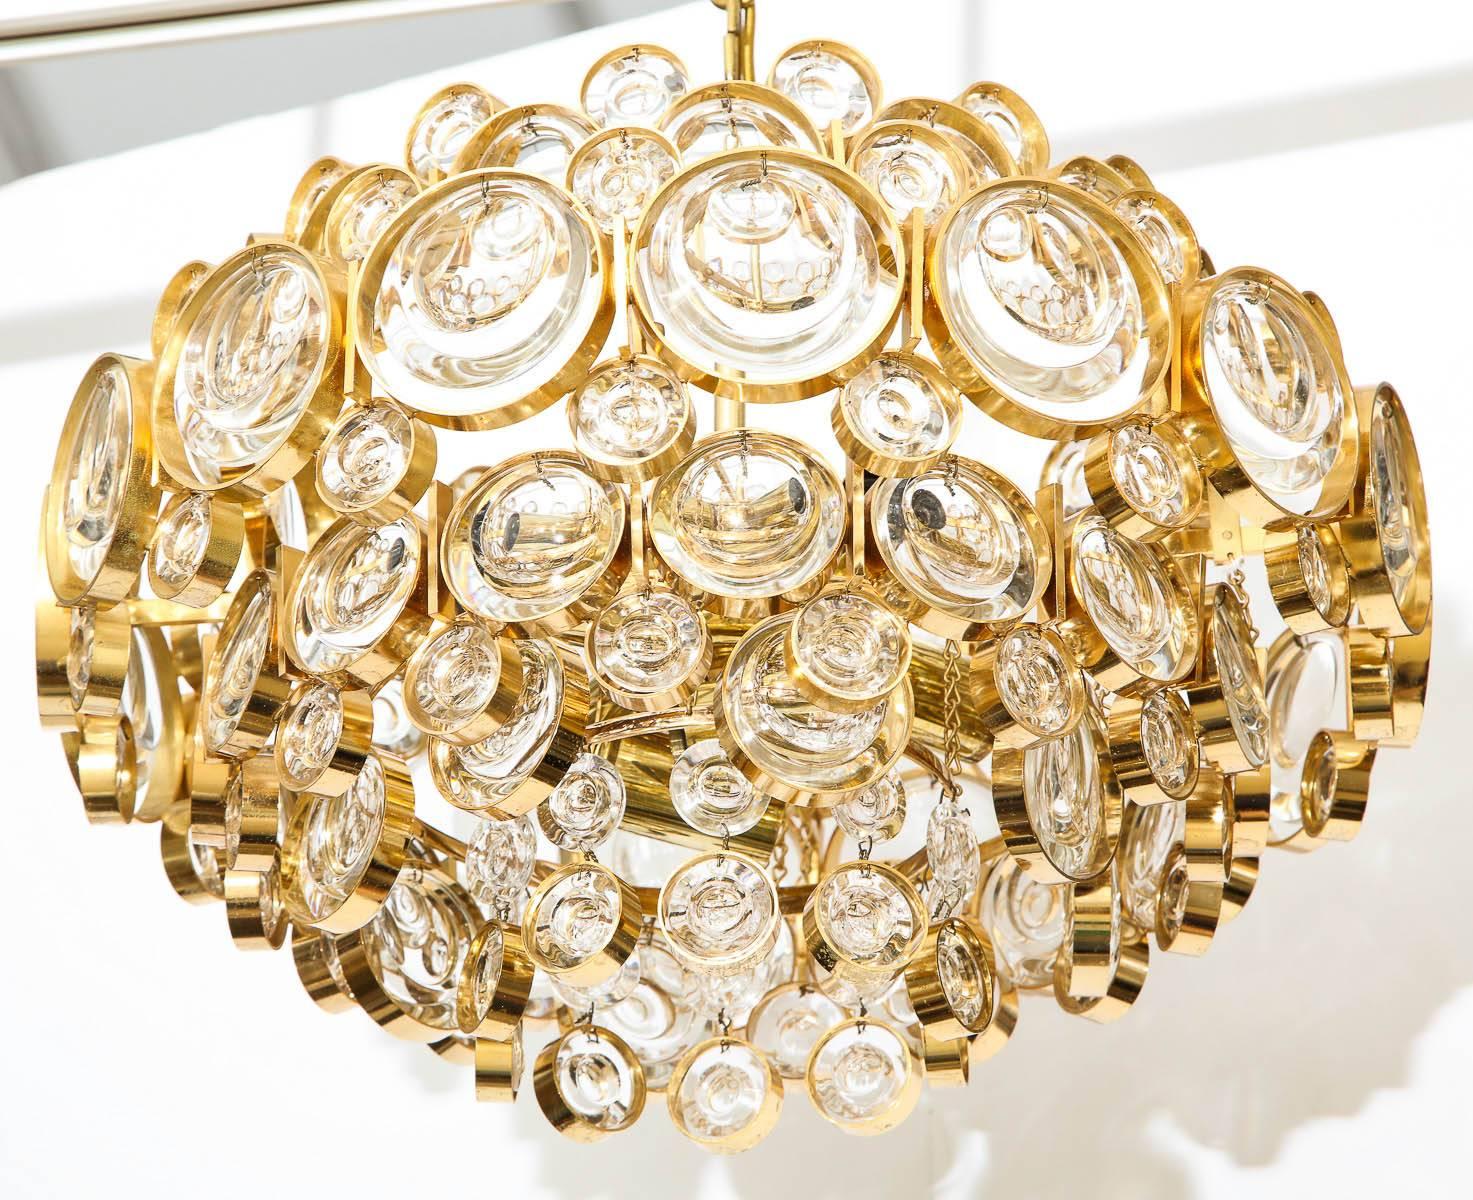 Amazing Austrian optic crystal chandelier on a 22-karat gold over brass frame. The chandelier gives off an amazing glow when illuminated and has been rewired for use in the USA using candelabra type bulbs.